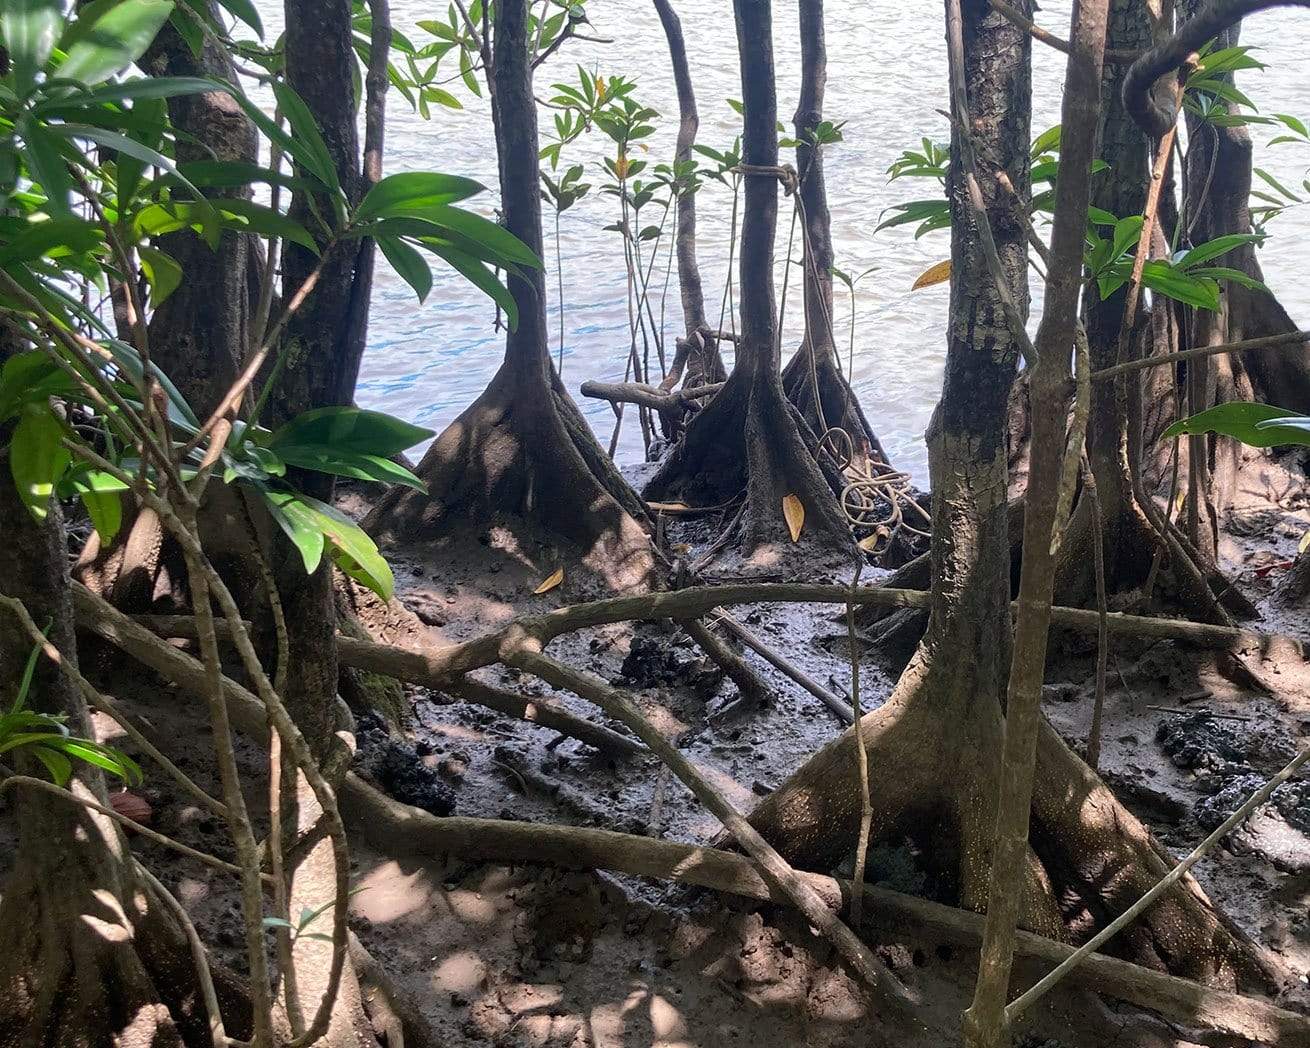 mangroves both young and mature growth